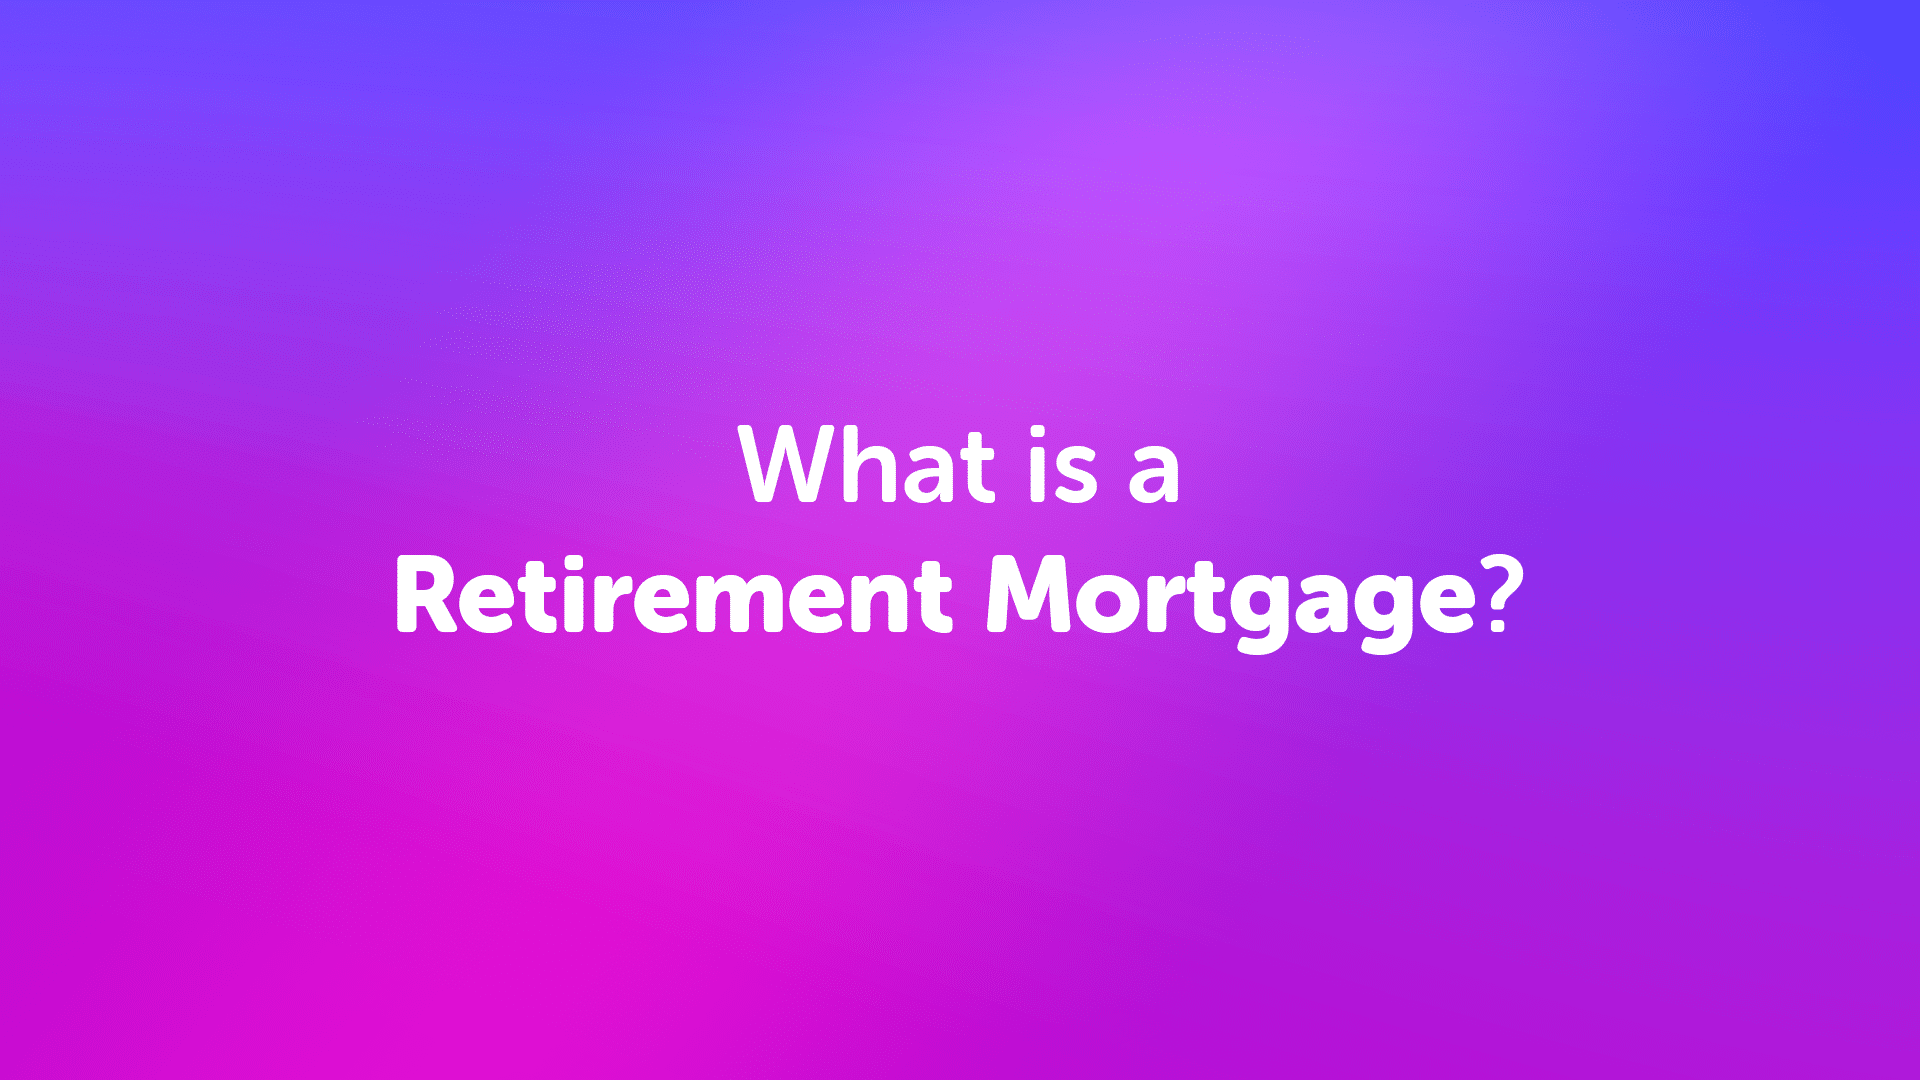 What is a retirement mortgage?